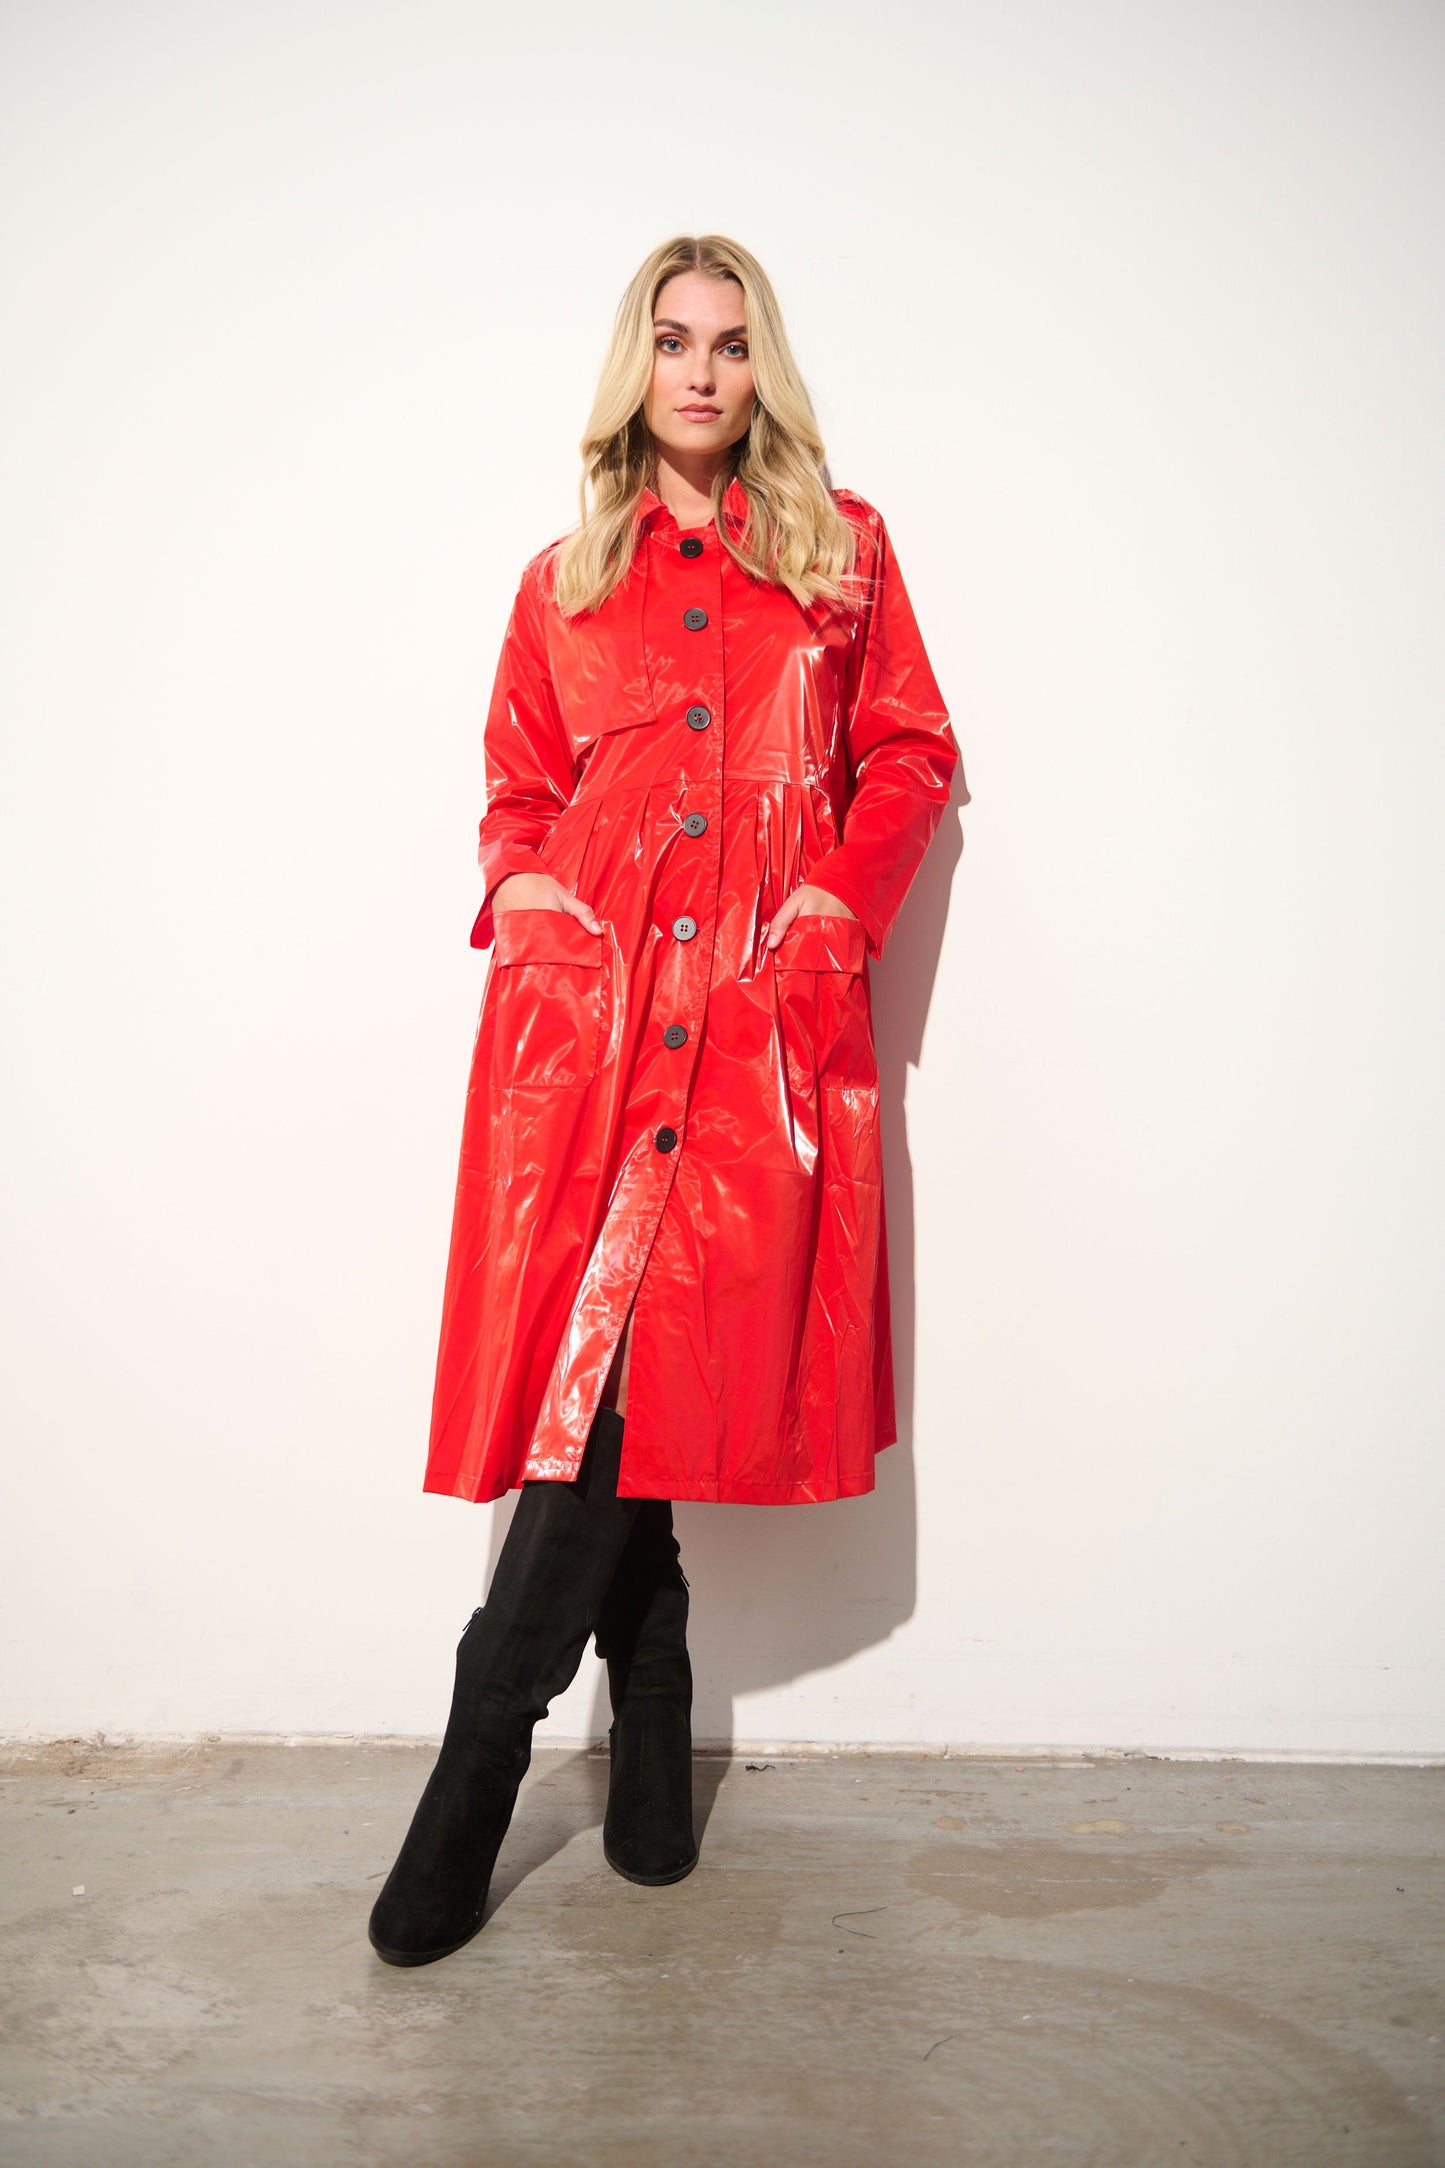 HOLMES & FALLON RAINCOAT WITH POCKETS IN RED